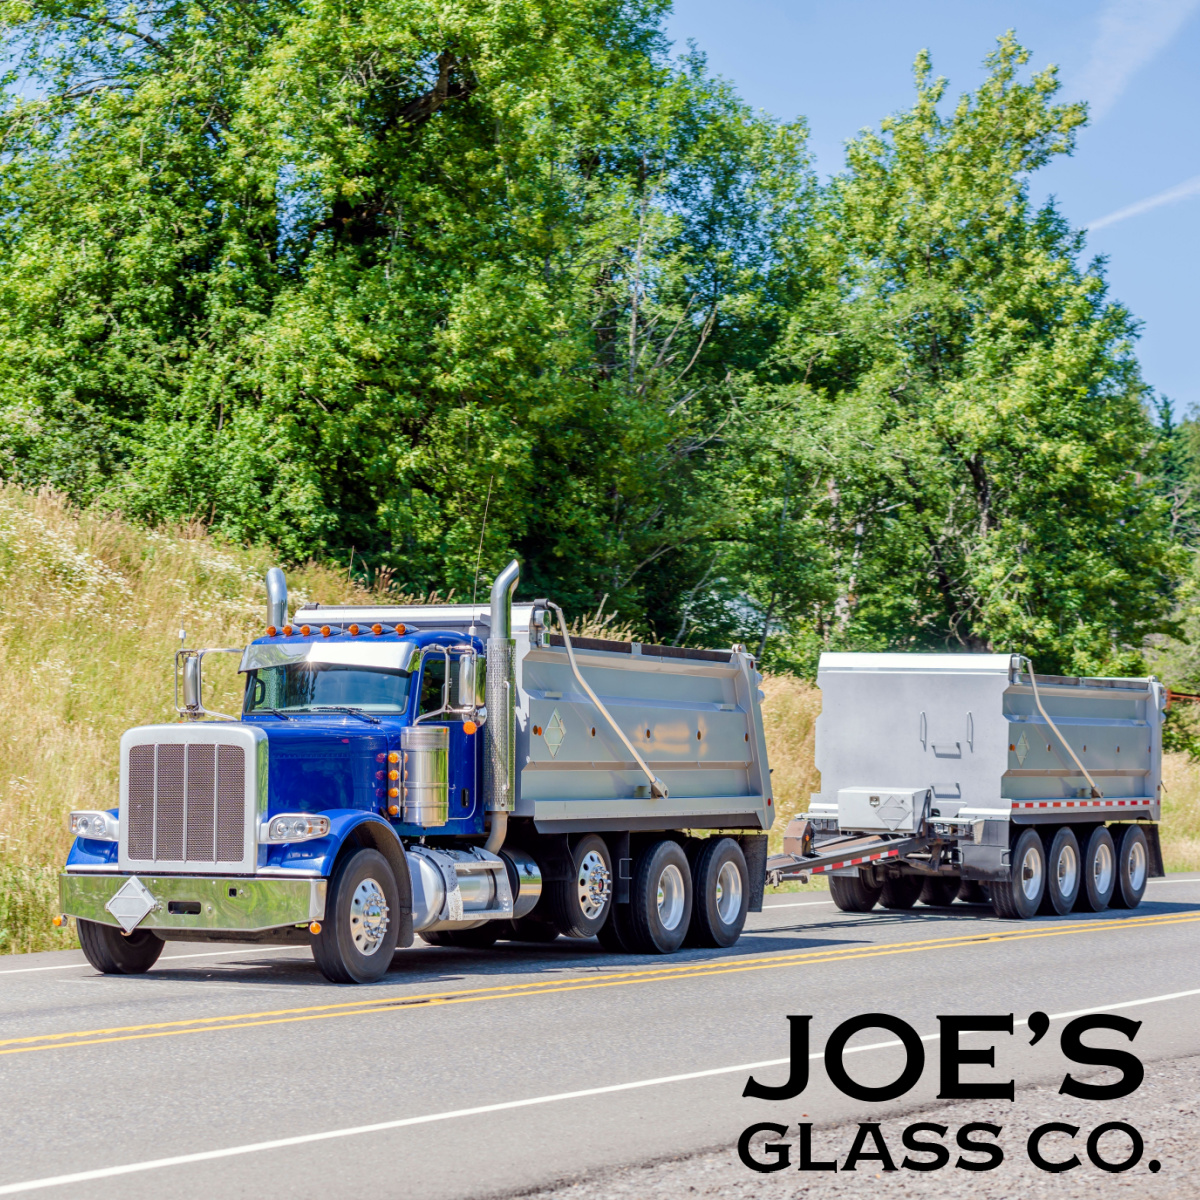 Joe's Glass Co.: Your Go-To Solution for Auto Rock Chip Repairs in Redmond